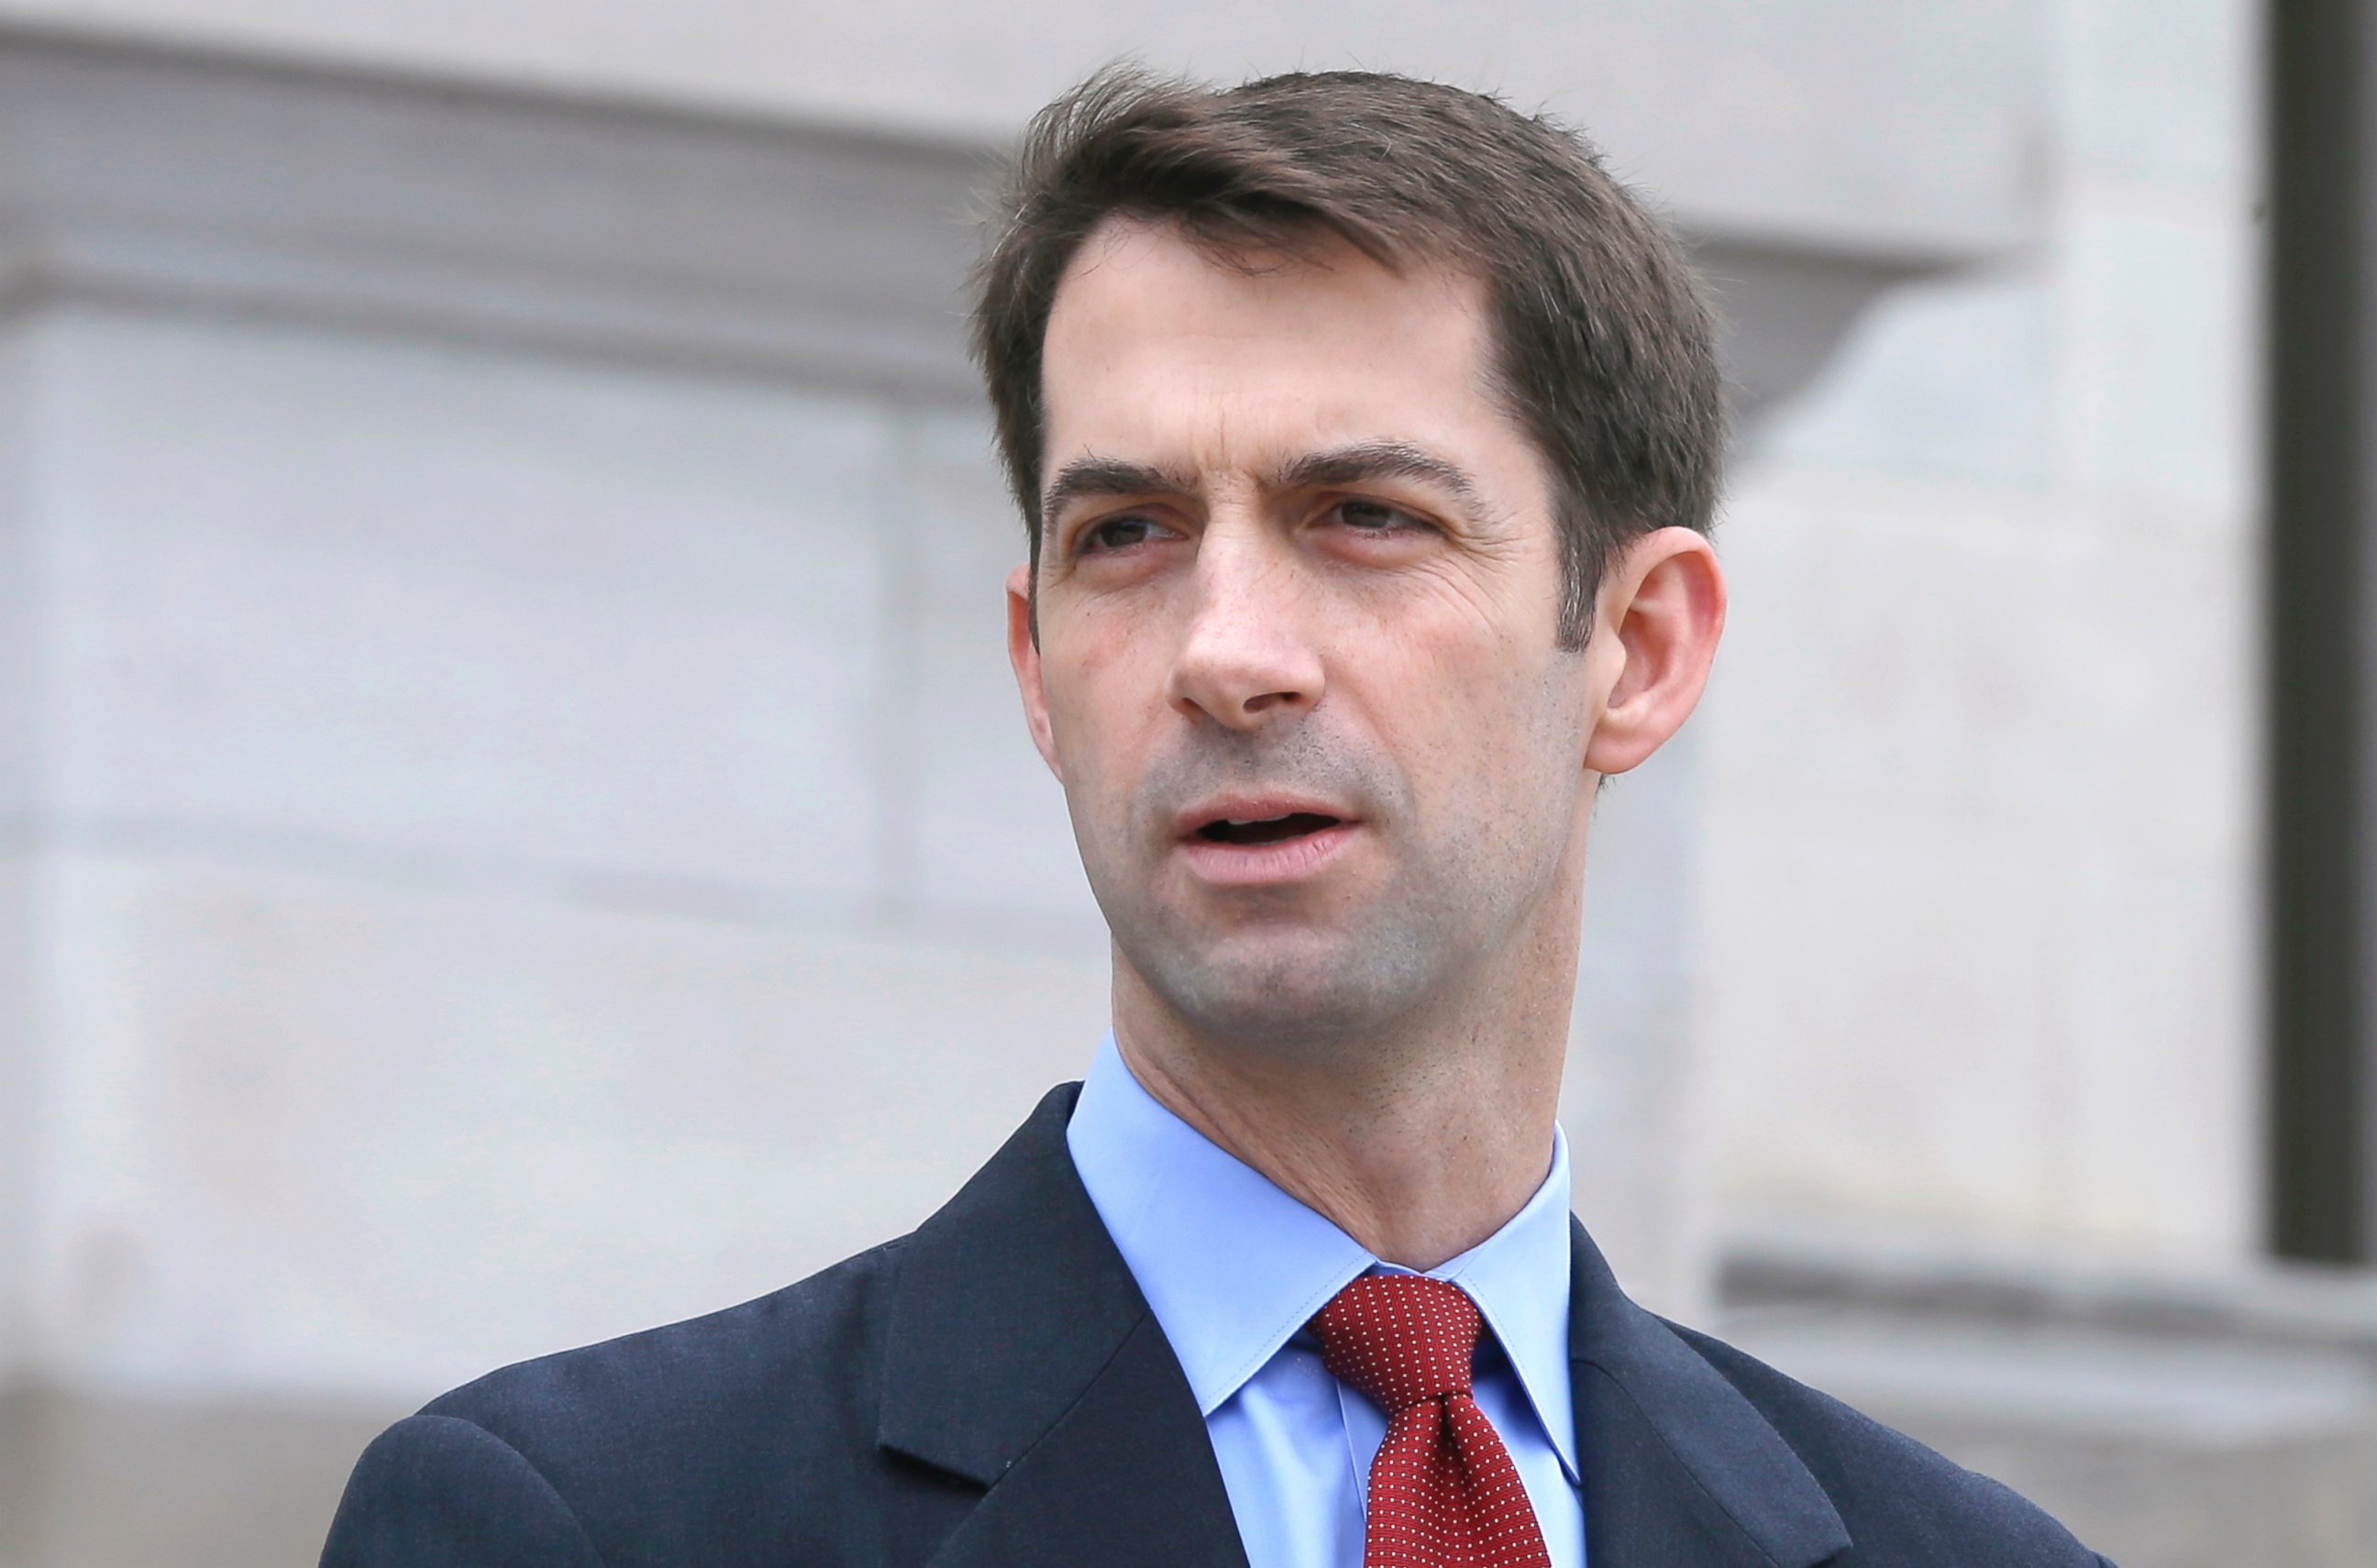 PHOTO: Sen. Tom Cotton, R-Ark., speaks in front of the Arkansas state Capitol in Little Rock, Ark., May 26, 2015.